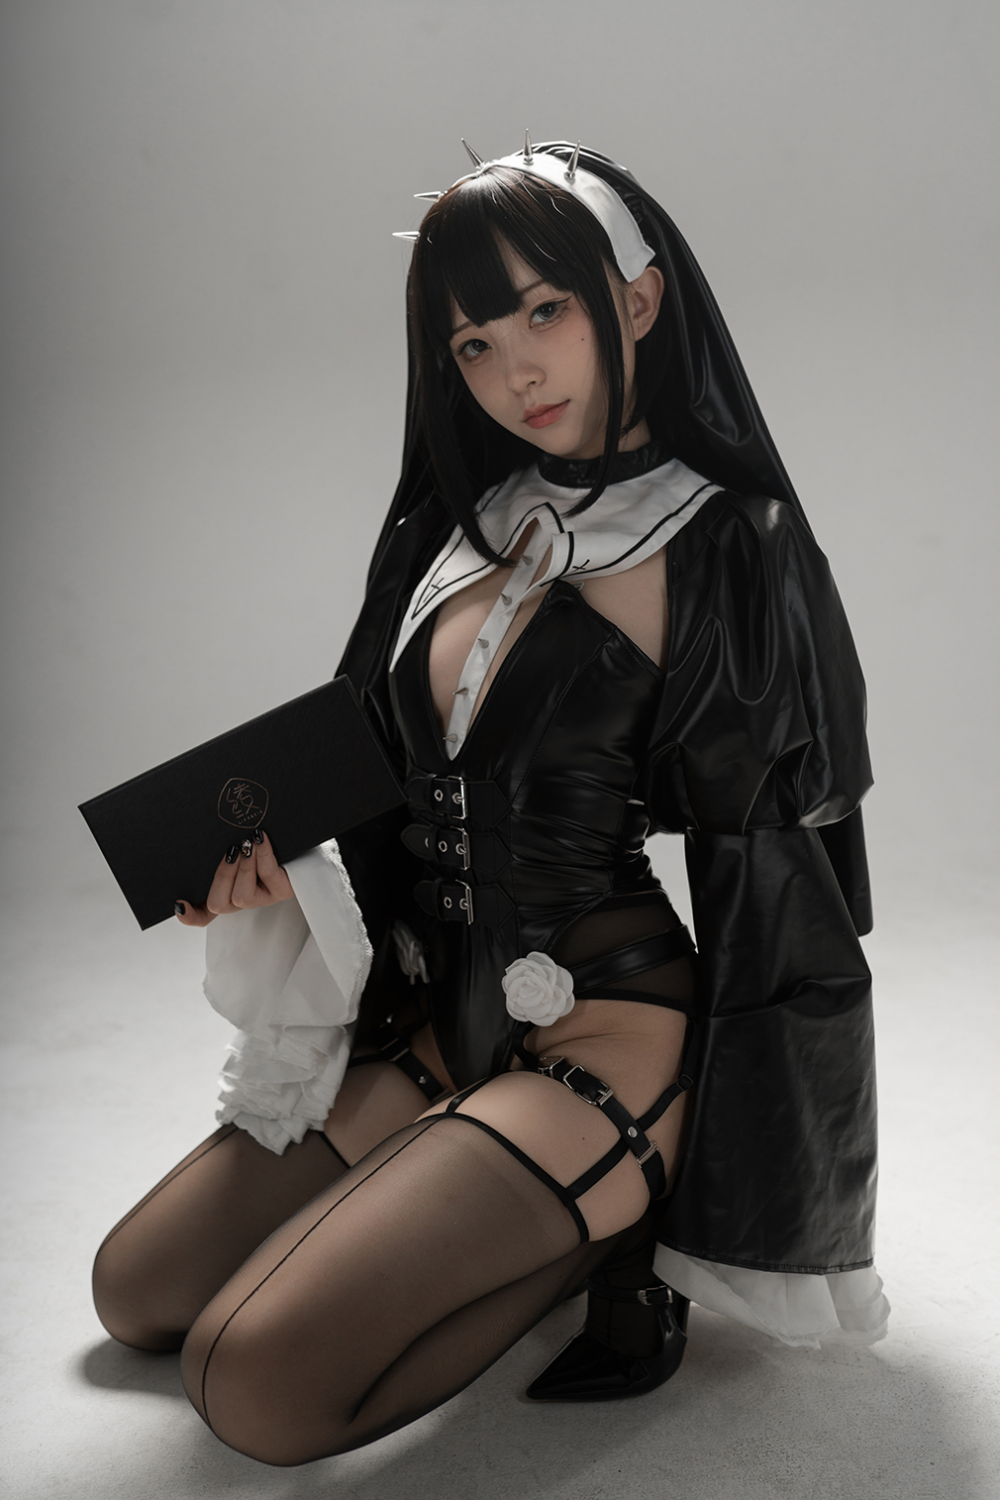 Anime Maid Girls Cosplay Porn - Cosplay Anime Asian Girl with Hot Lingerie - Porn - EroMe